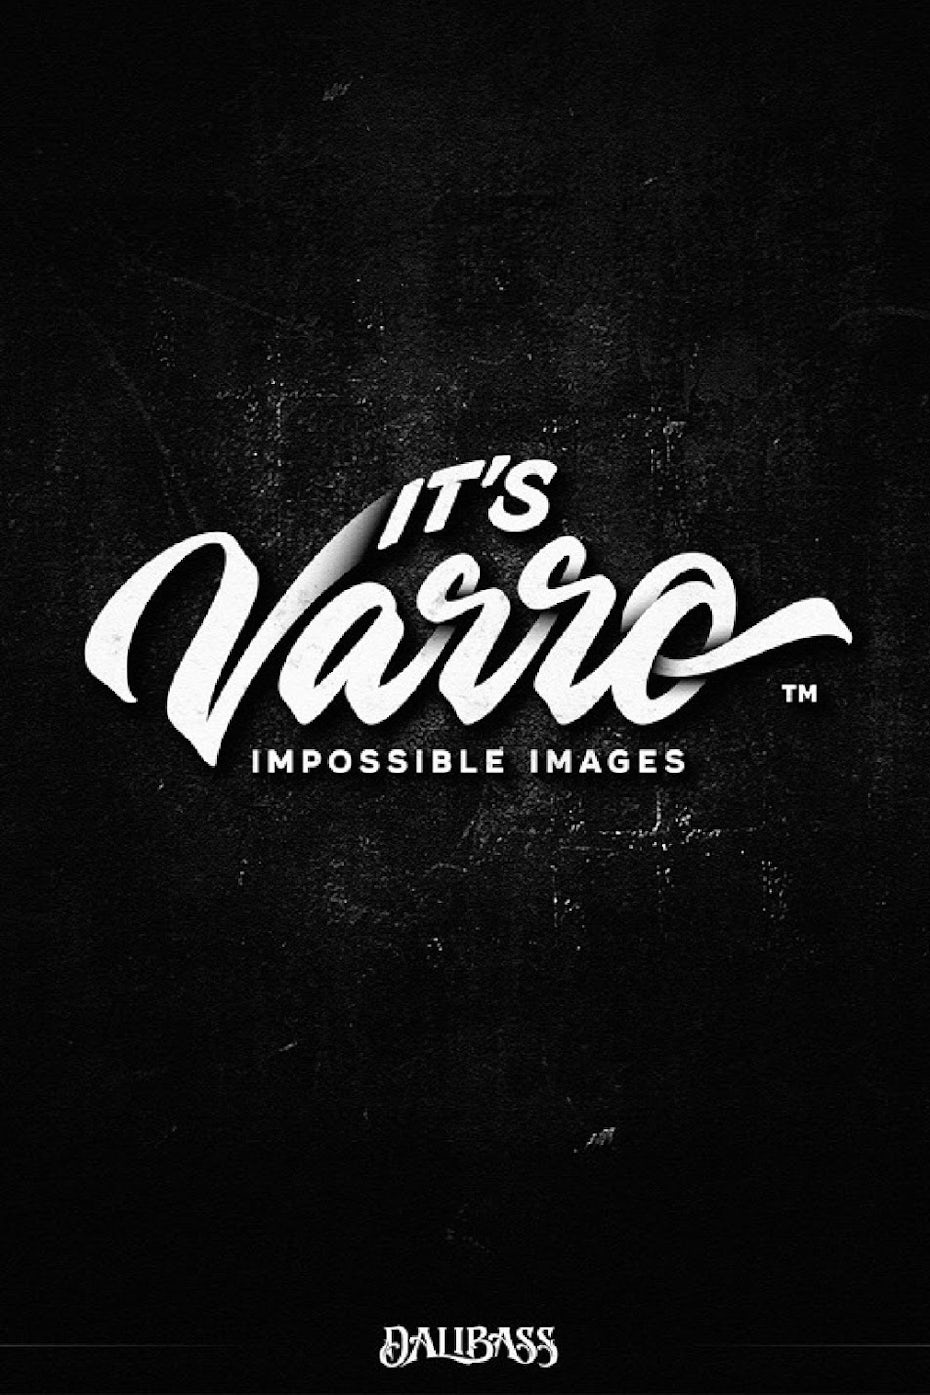 Its Varro Impossible Images logo